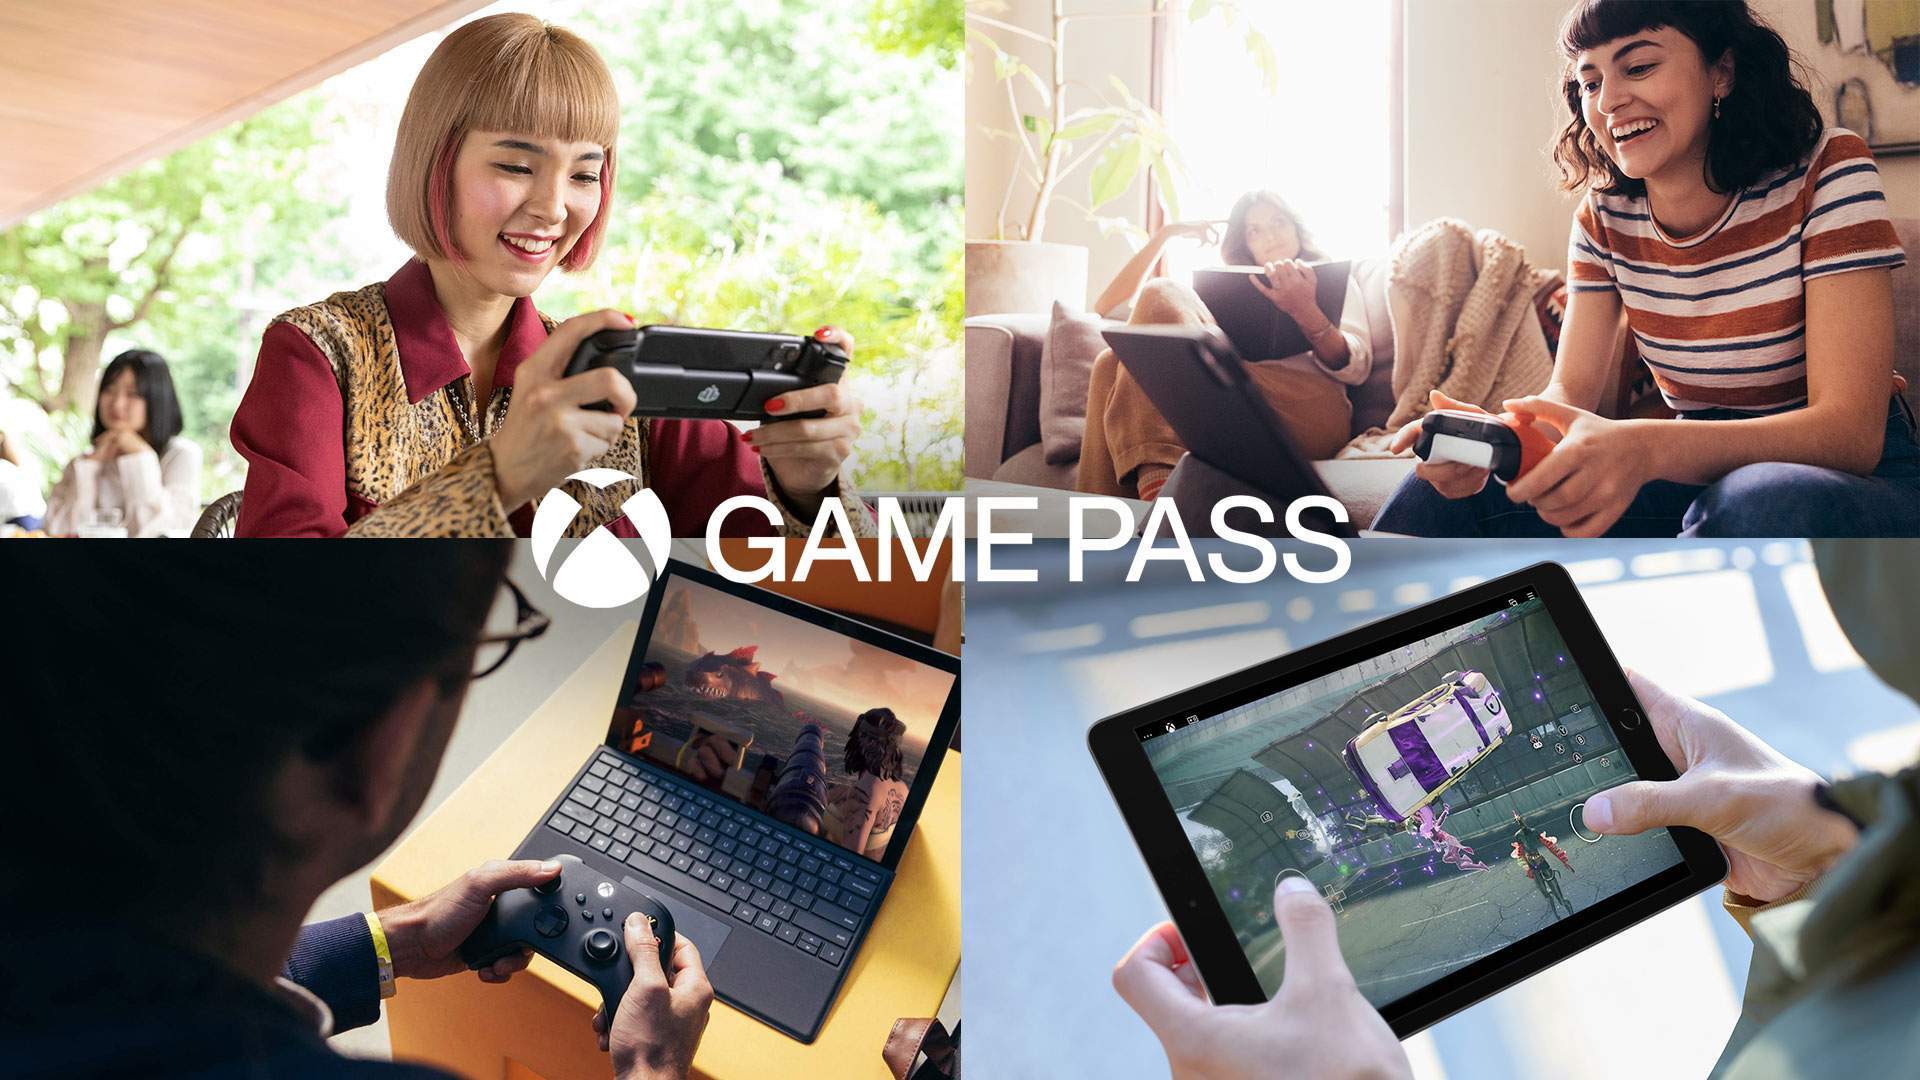 Save 10% on 12 months of Game Pass Ultimate this Black Friday